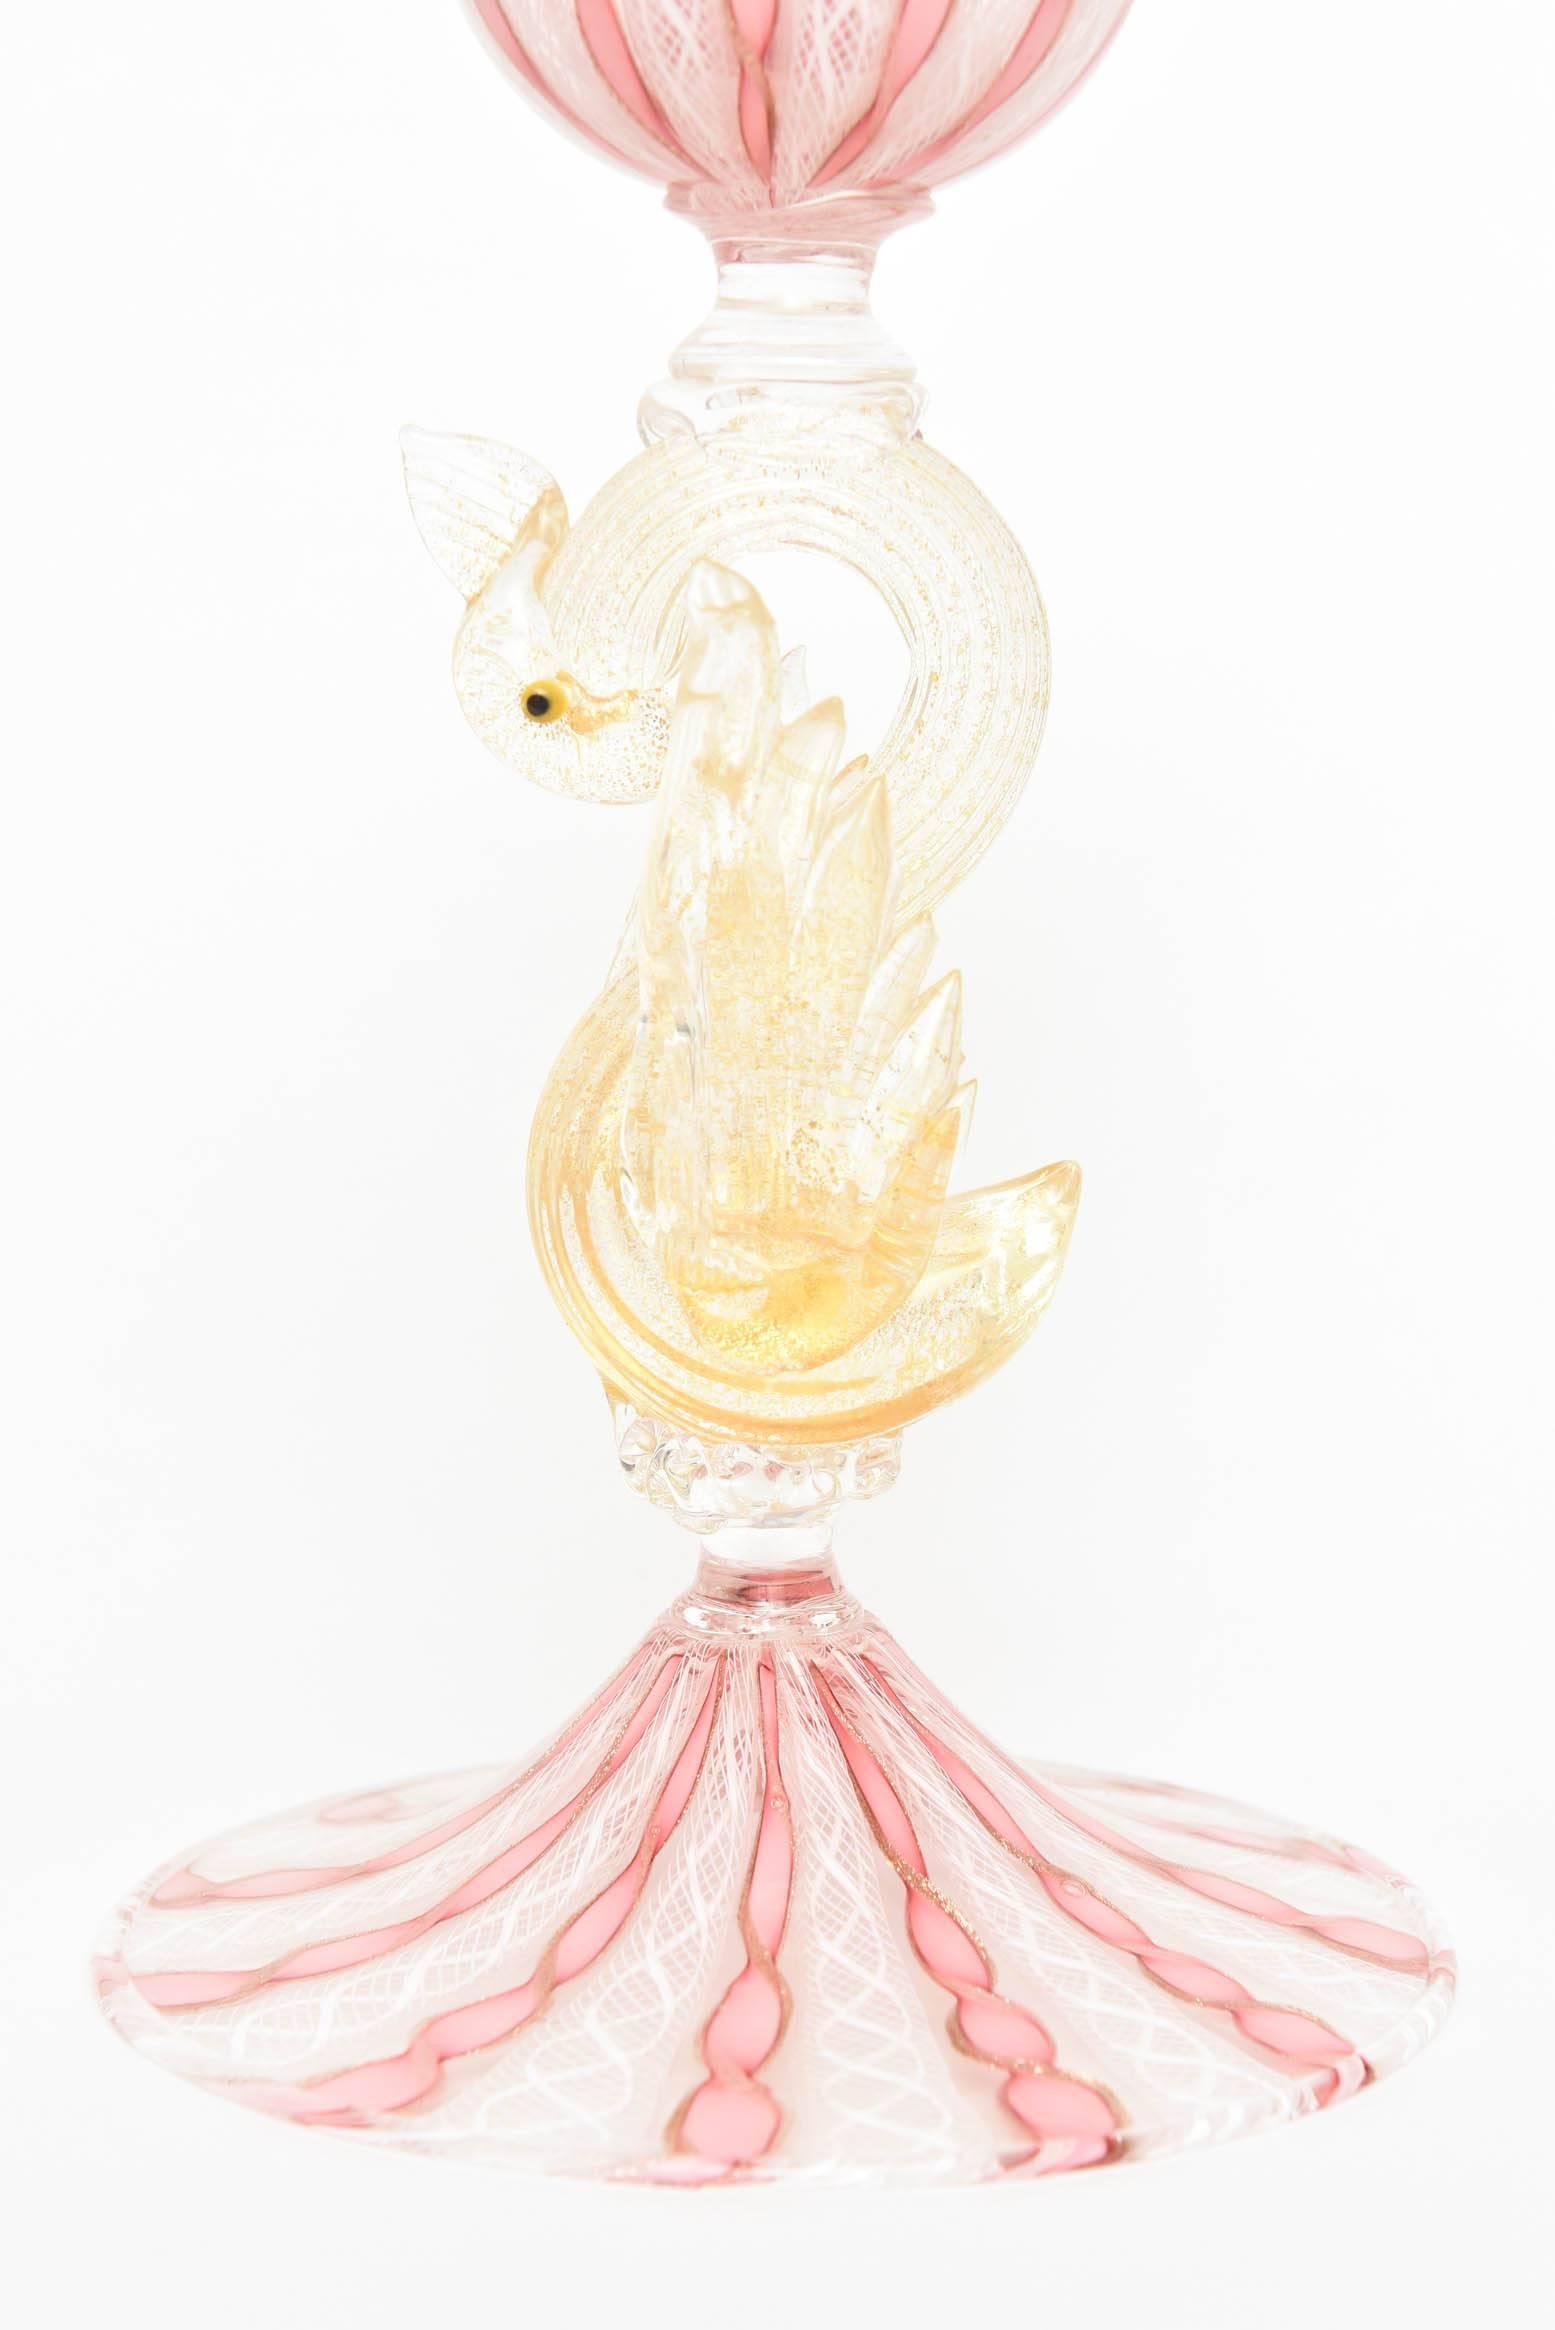 Hand-Crafted Pair of Venetian Pink White with Figural Swan Candlesticks, Latticino Swirls